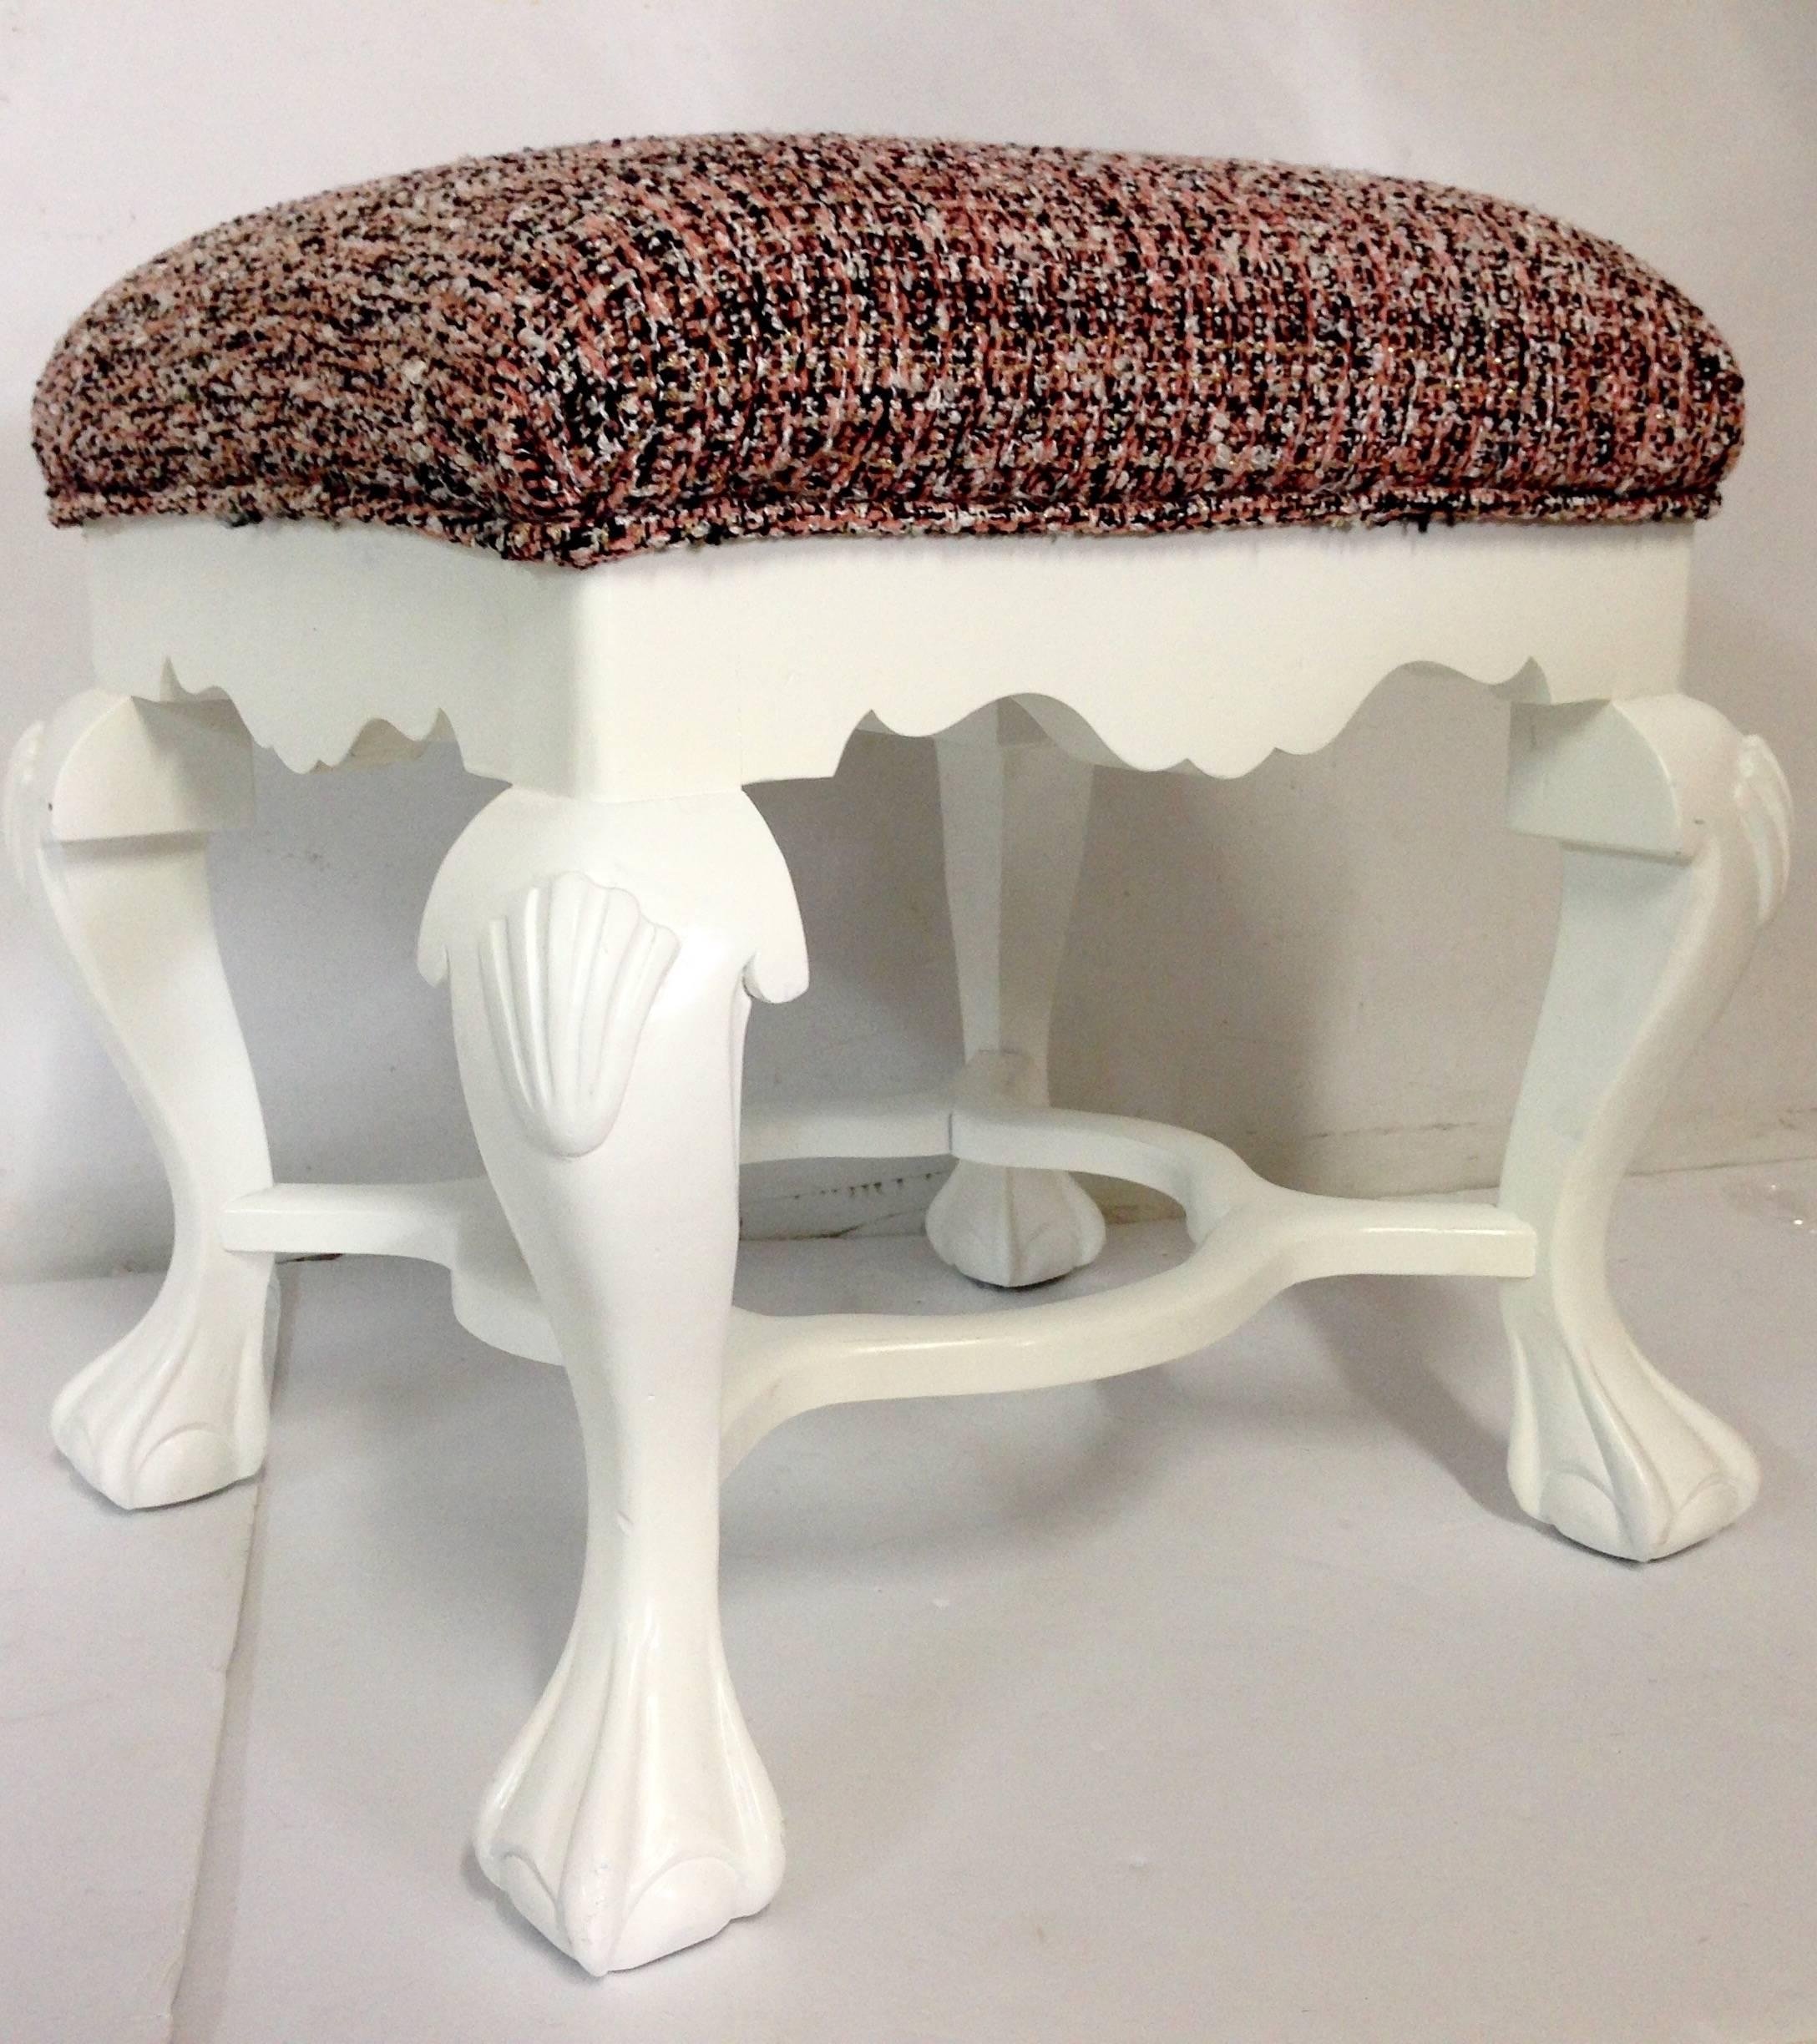 Large, carved Queen Anne-style ottoman or bench. Newly finished in white lacquer paint and reupholstered in black, white and pink Chanel - style vintage wool bouclé́ fabric. Fabric is in excellent vintage condition.
2 available.
 